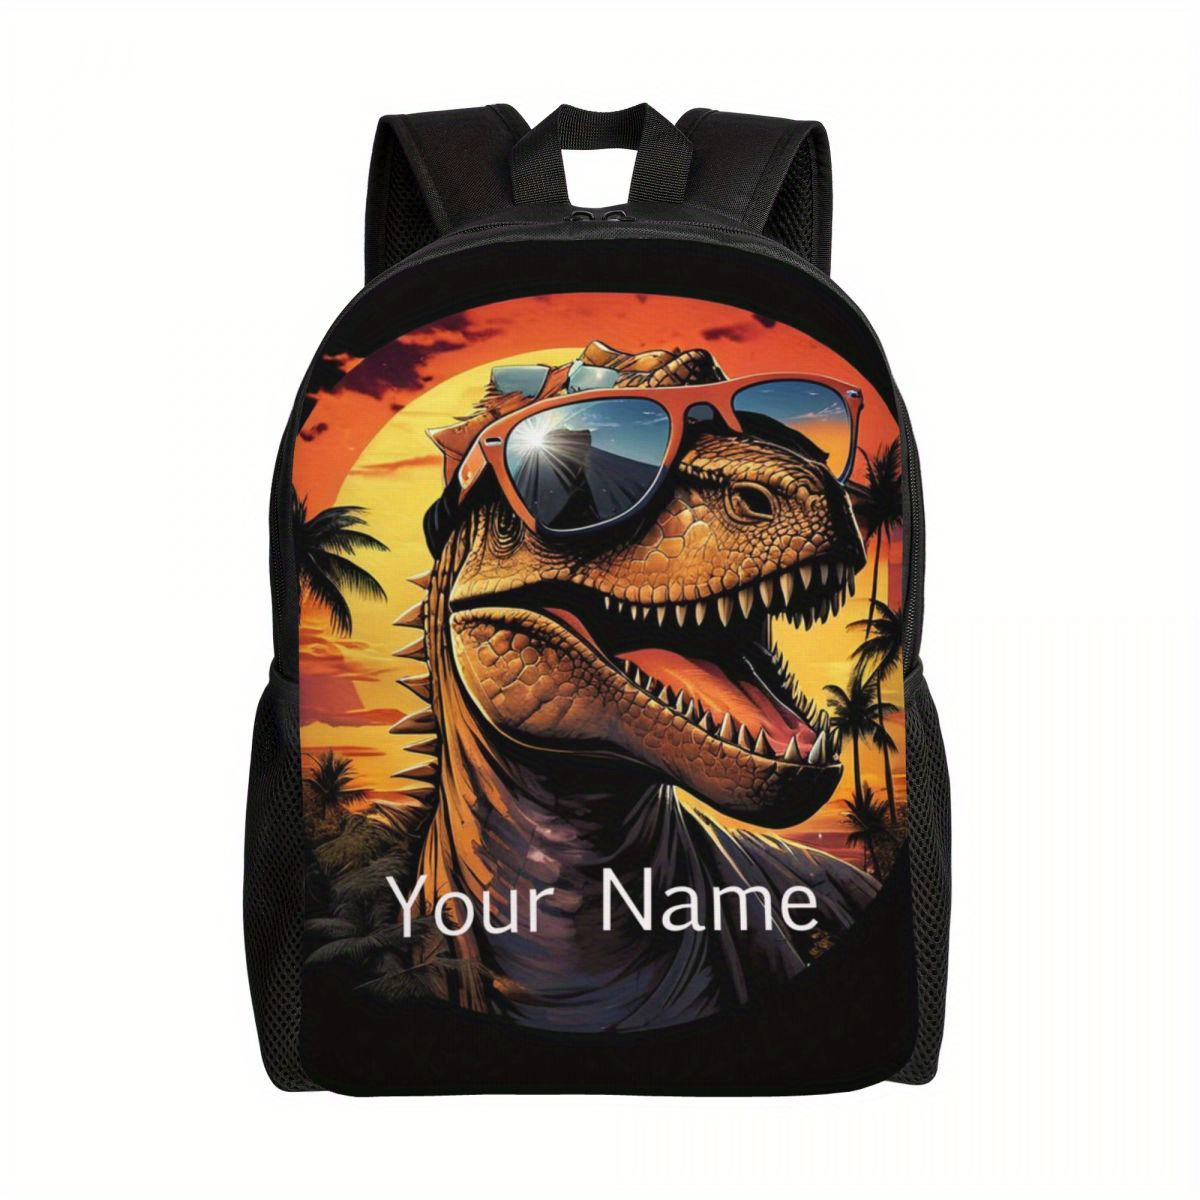 

Dinosaur & Sunset Patten Backpack, Personalized Travel & School & Commuting Backpack - Add Your Text, Durable & Unique Backpack, Ideal For Men & Women